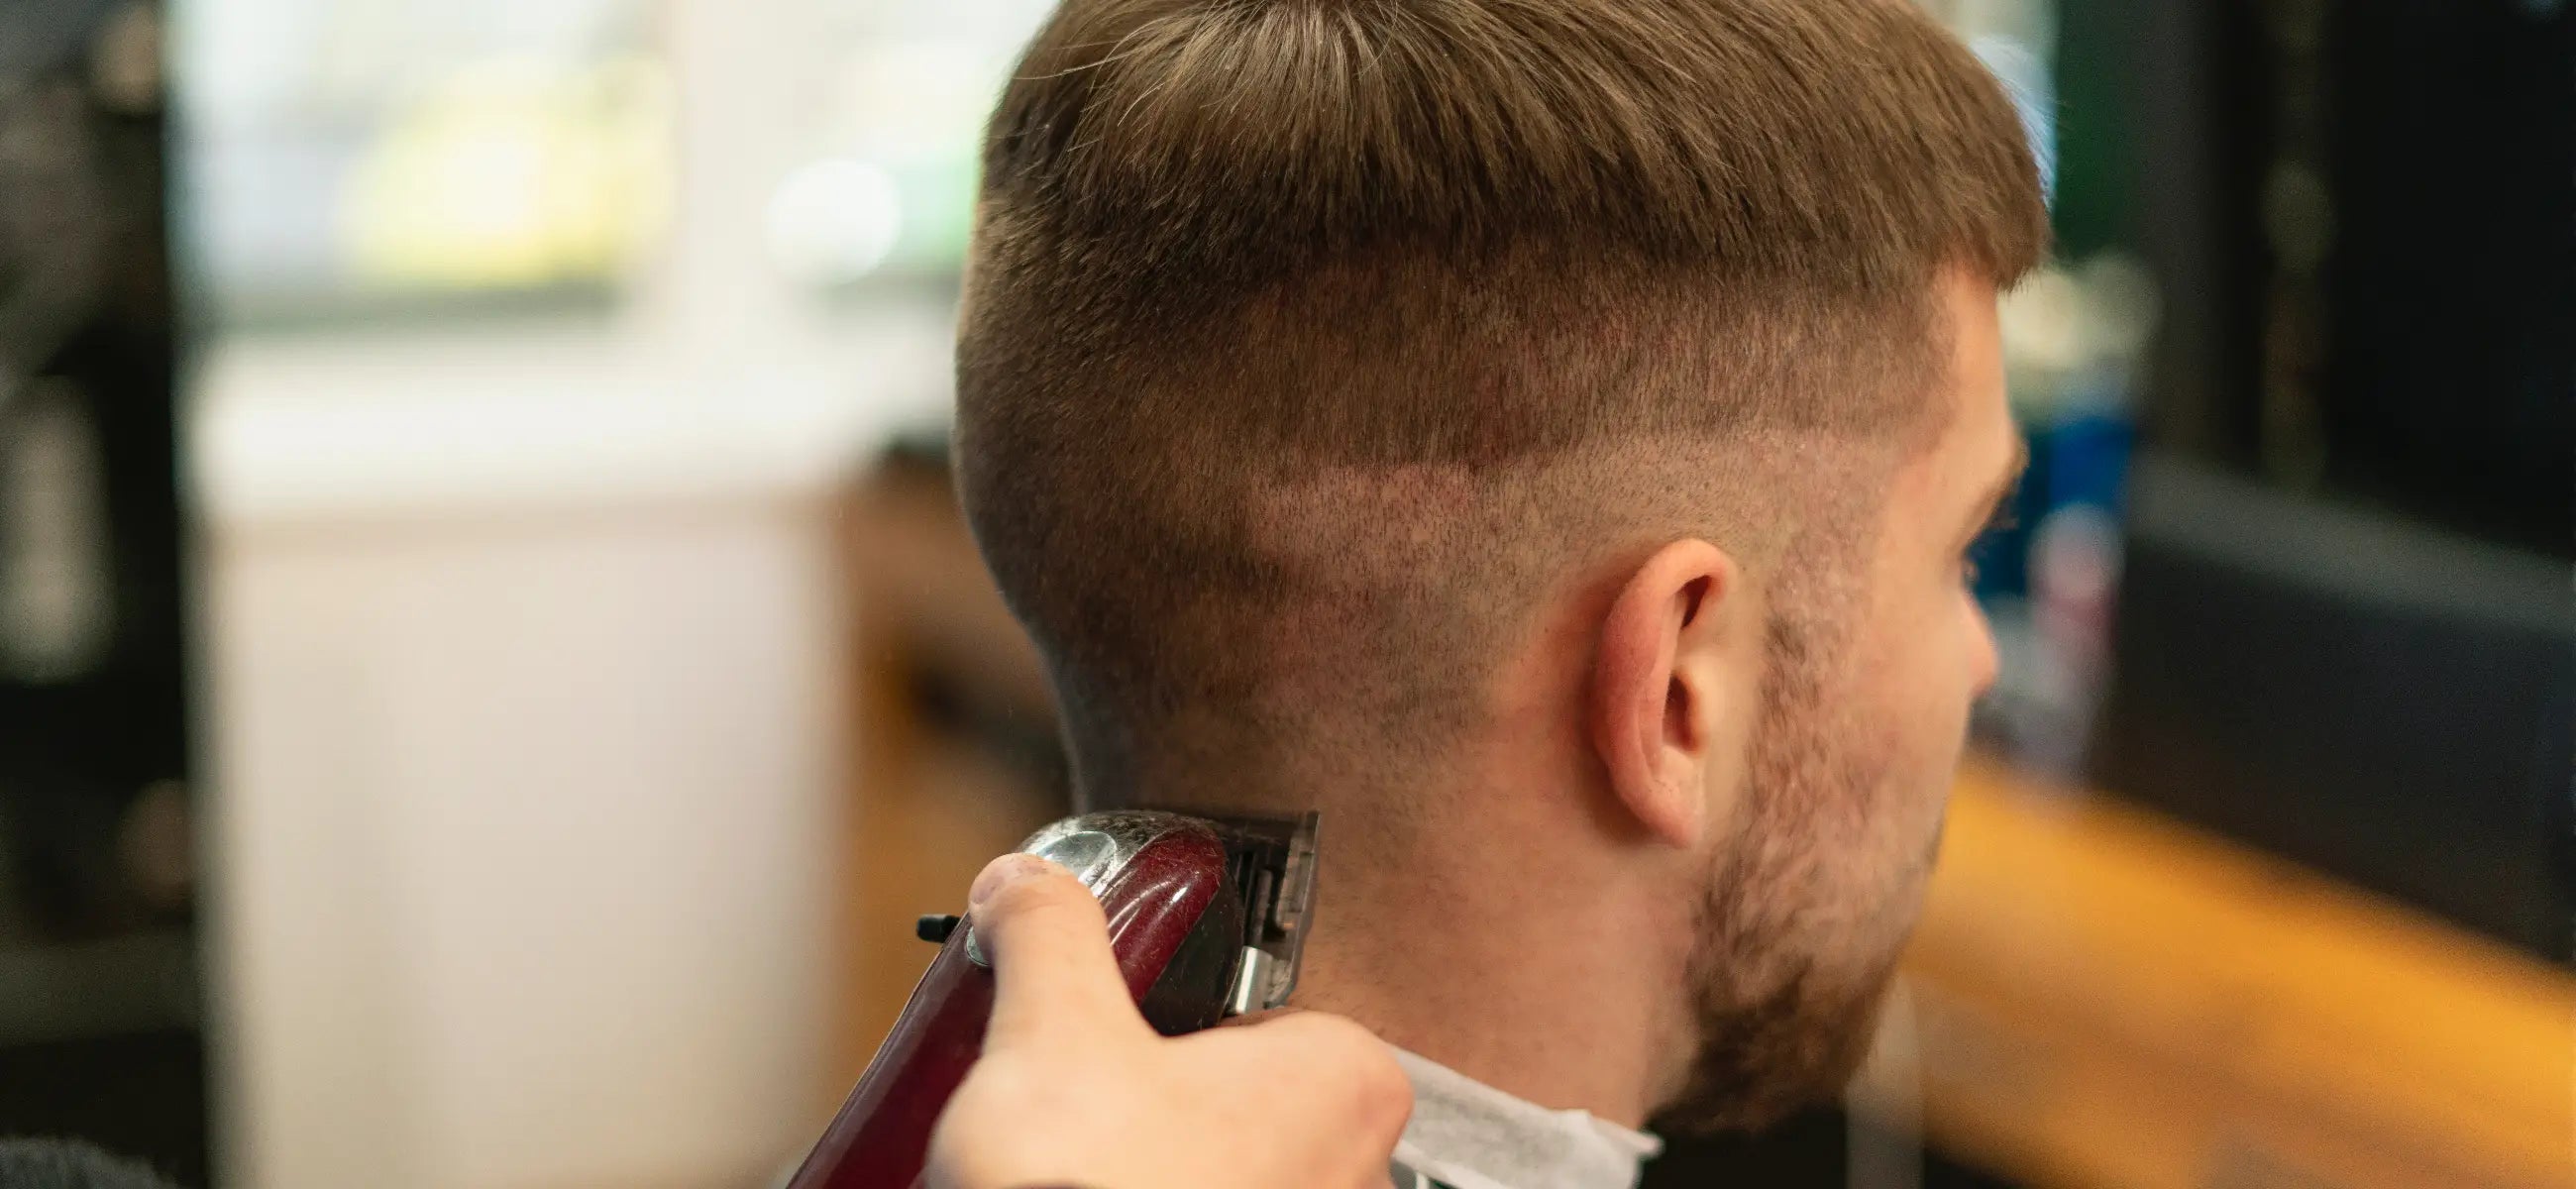 The Edgar hair cut – what is it all about and what styles around this hair cut are trending?